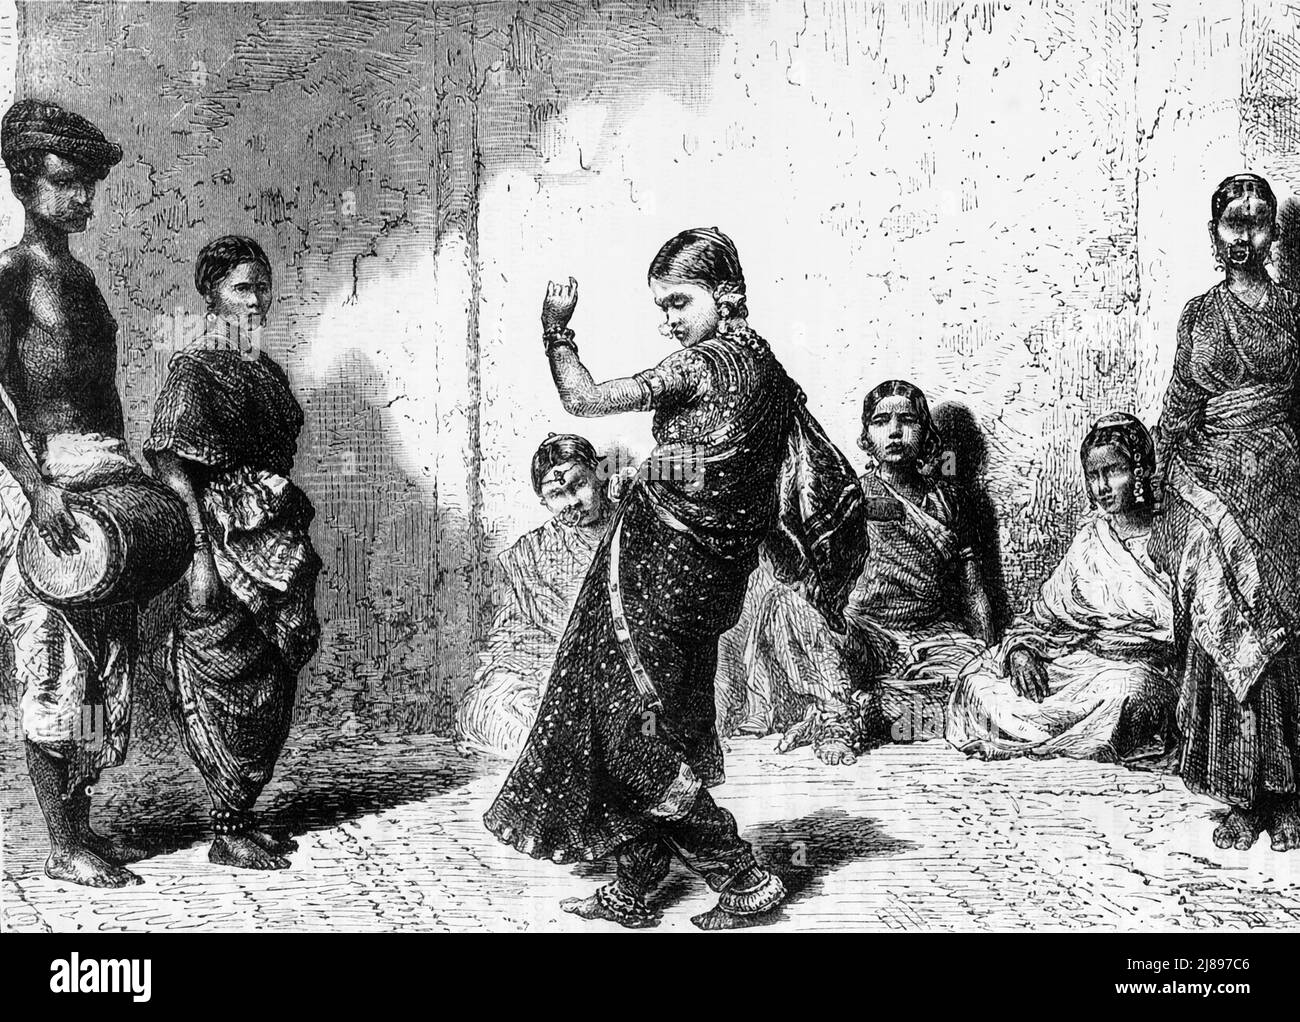 'Dancing Girls of Bombay', c1891. From &quot;Cassell's Illustrated History of India Vol. I.&quot;, by James Grant. [Cassell Petter &amp; Galpin, London, Paris and New York] Stock Photo